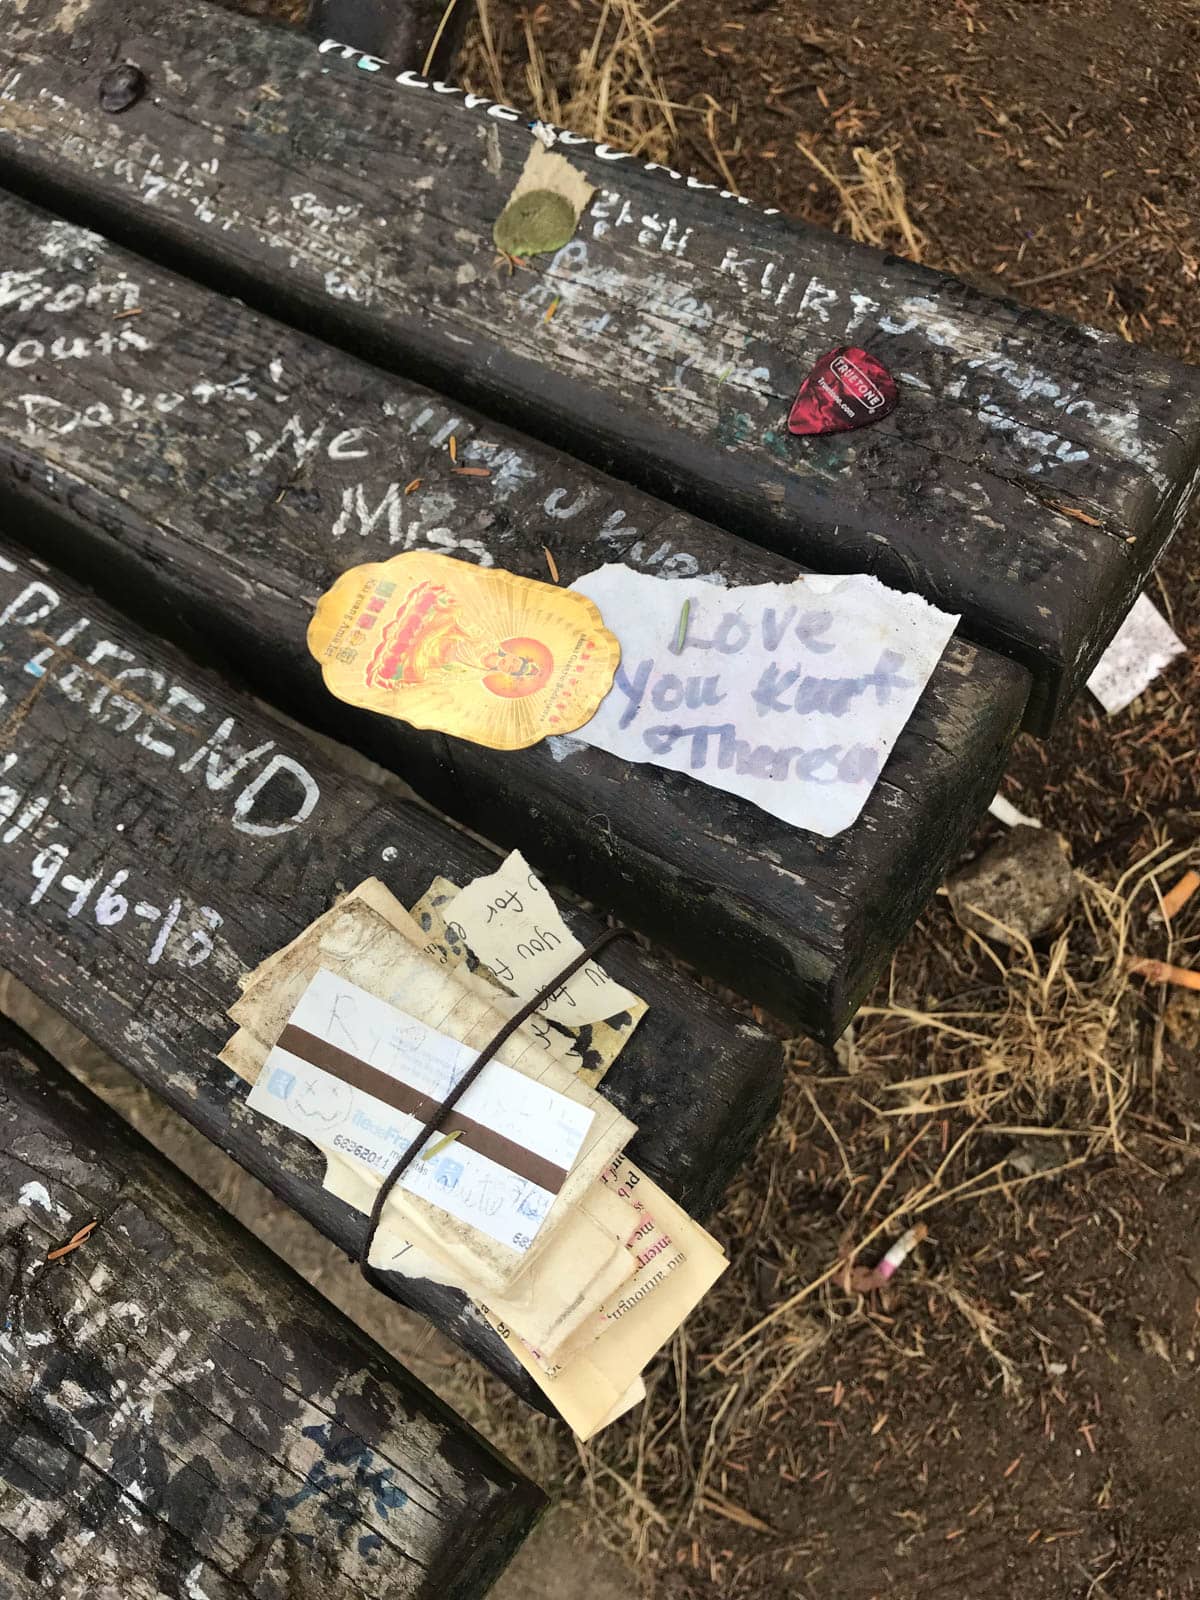 A close up of a bench with some writing painted on it in white, “We miss you”, “legend”, and some handwritten notes tied to the bench, one reading “Love you Kurt”.